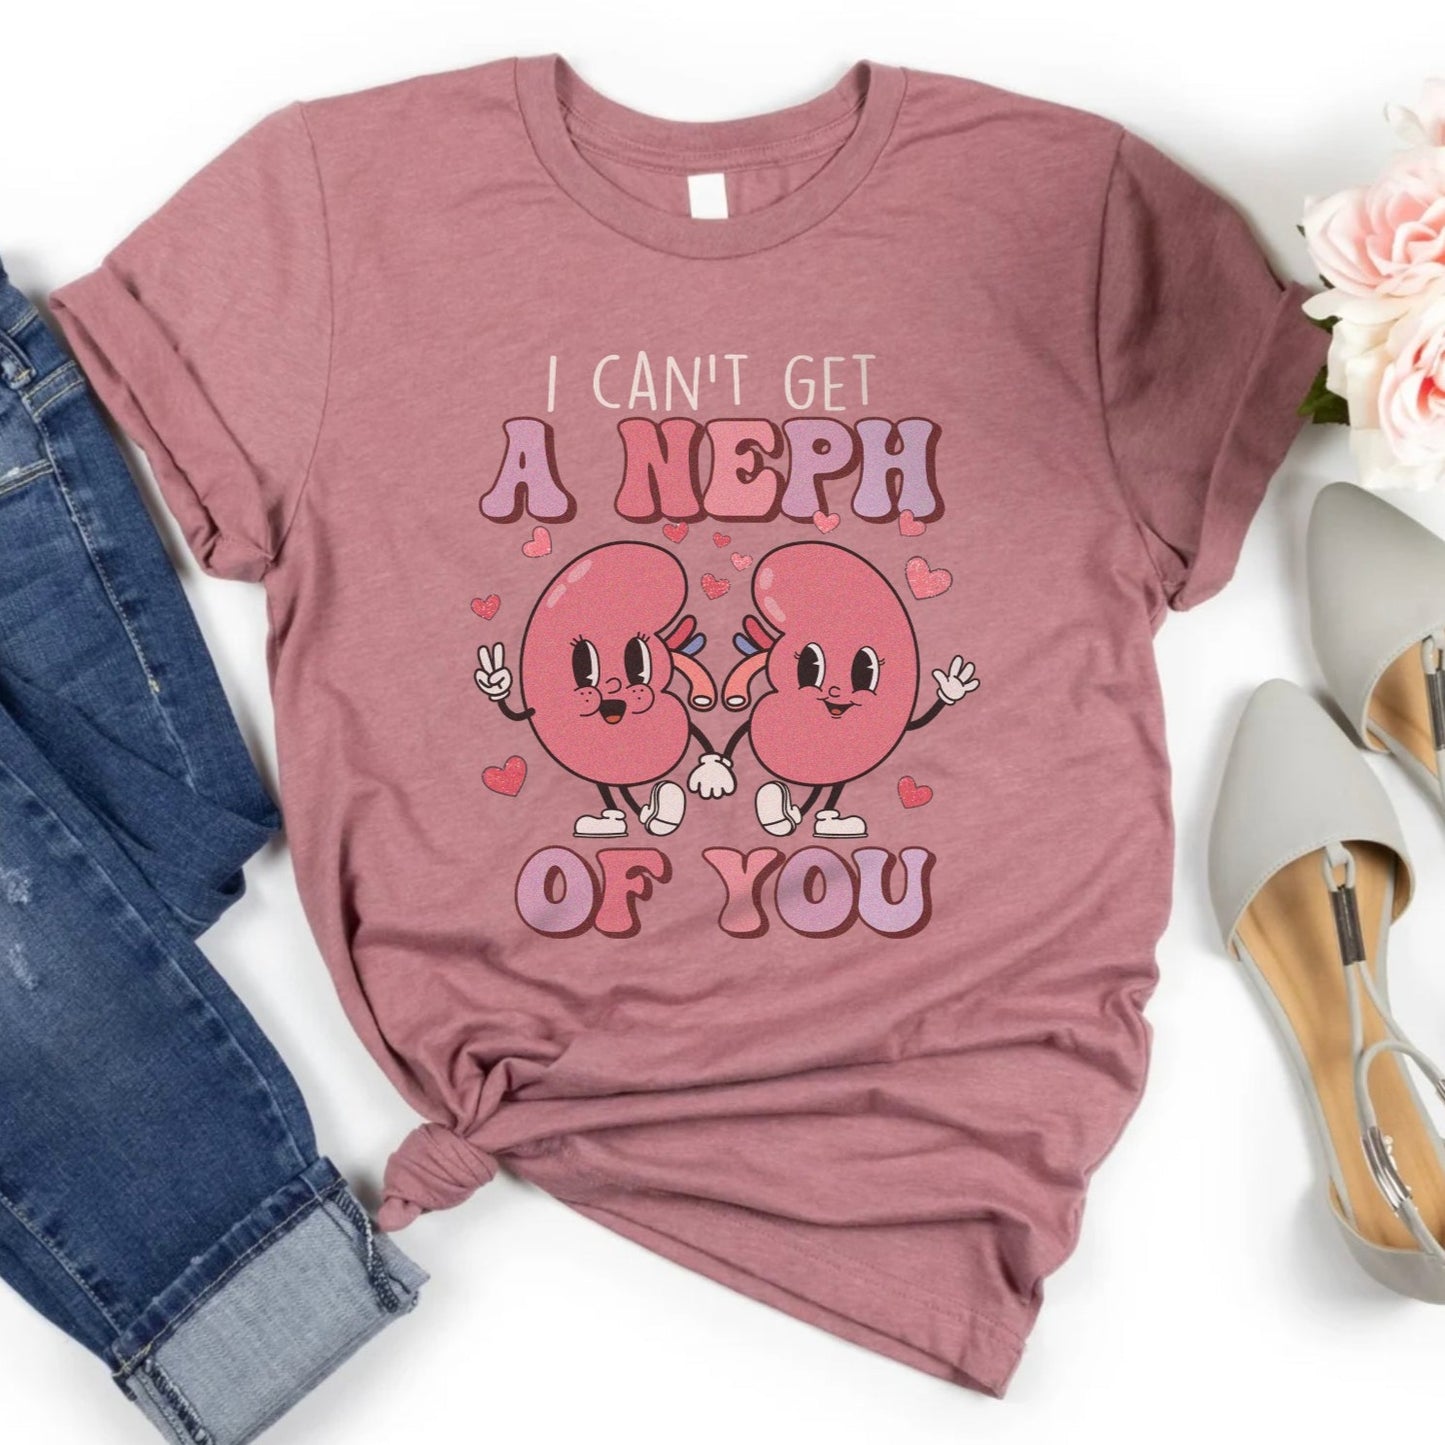 Can't Get A Neph of You T-Shirt